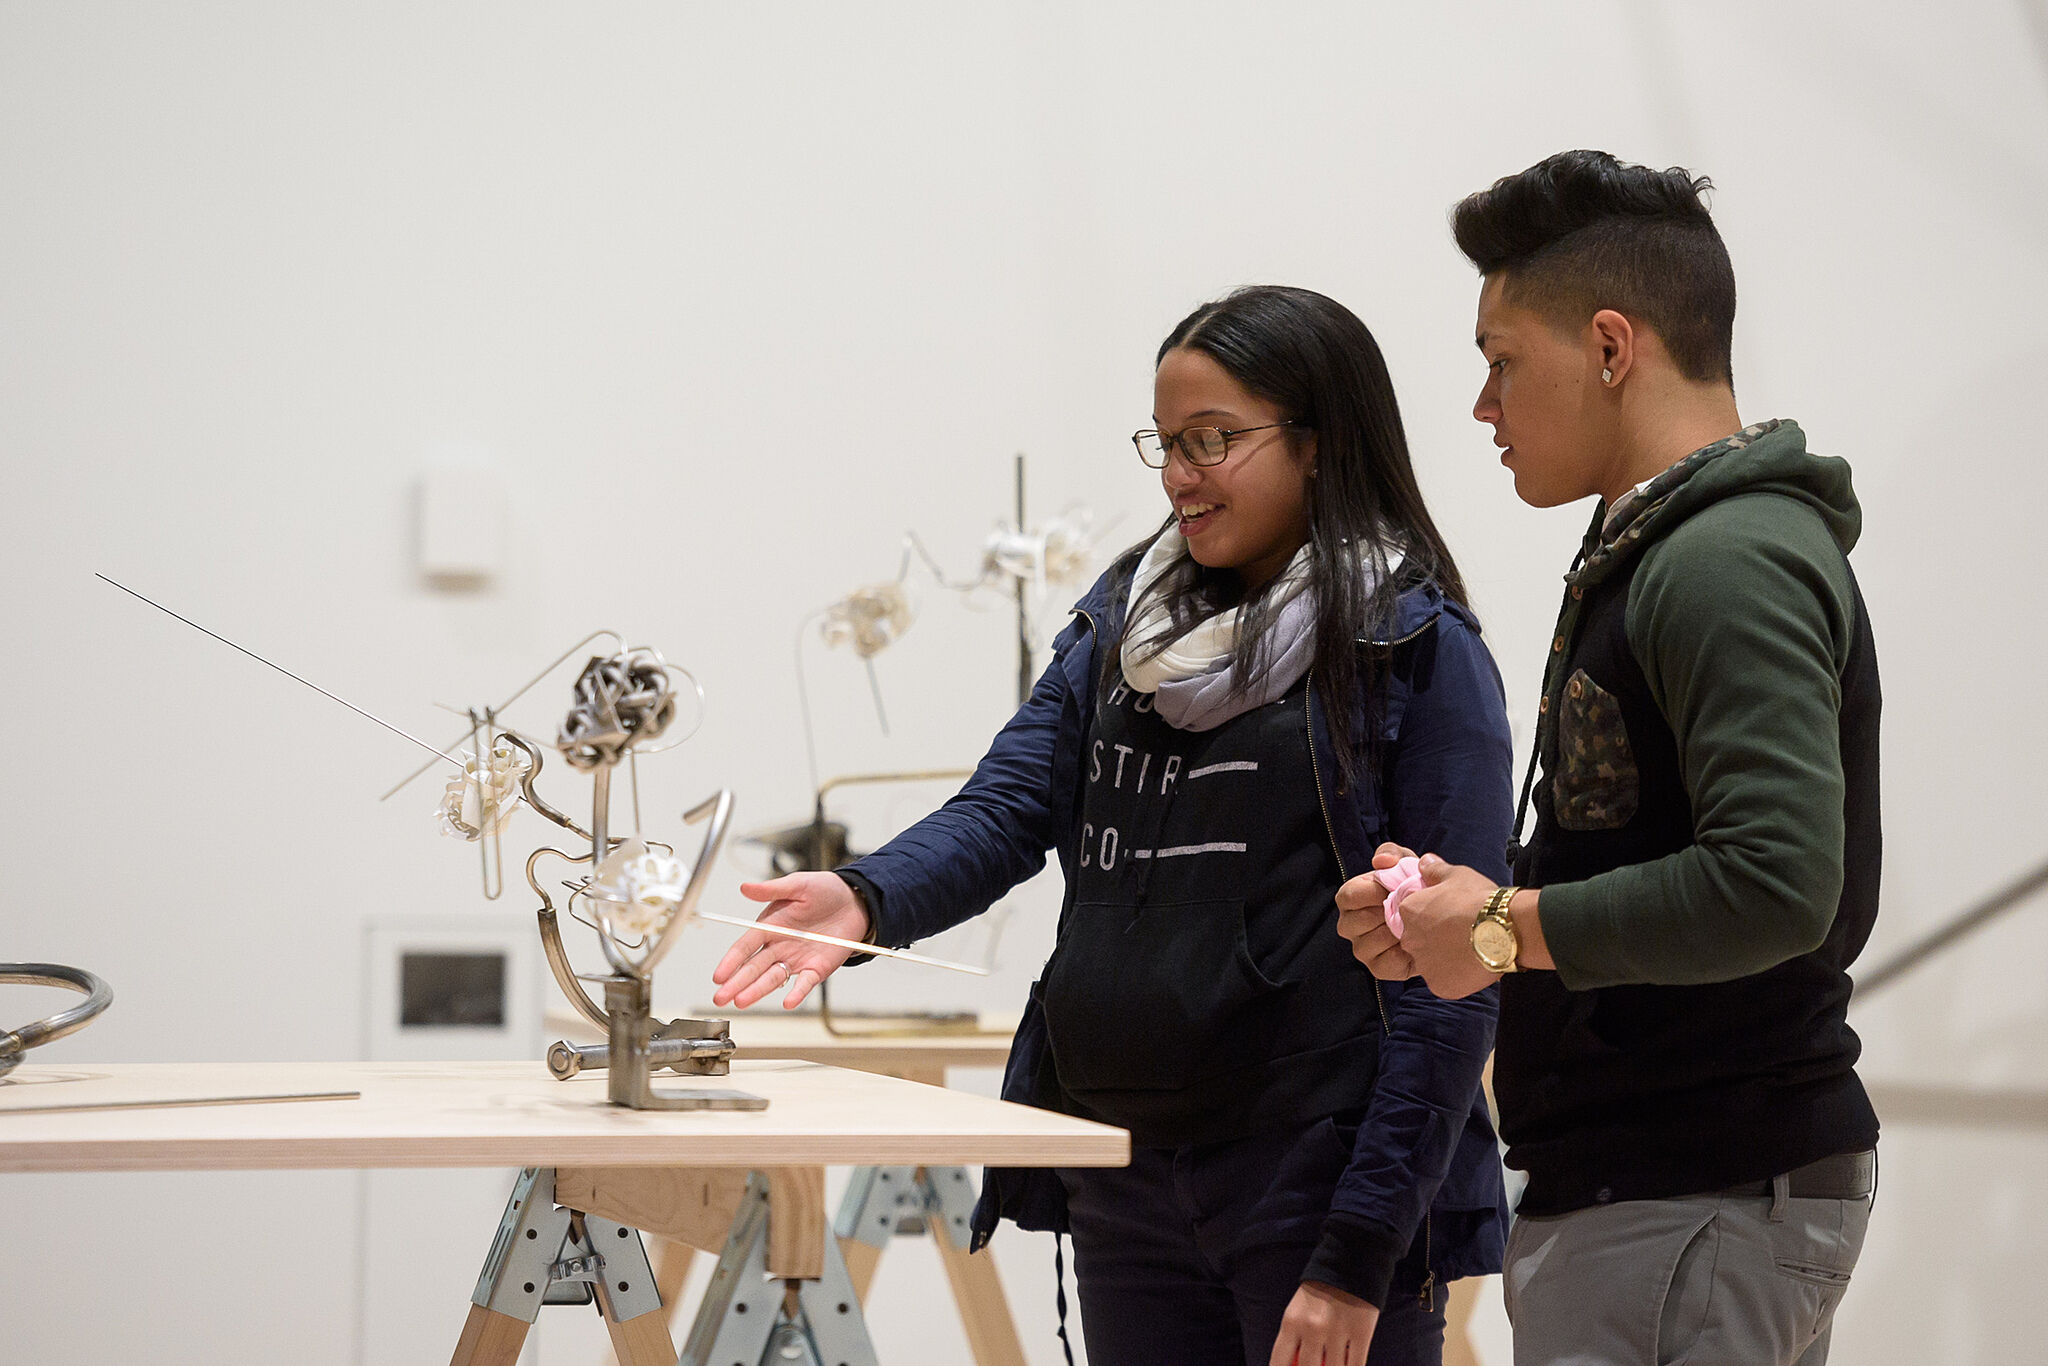 Two teens look at a sculpture on a table.